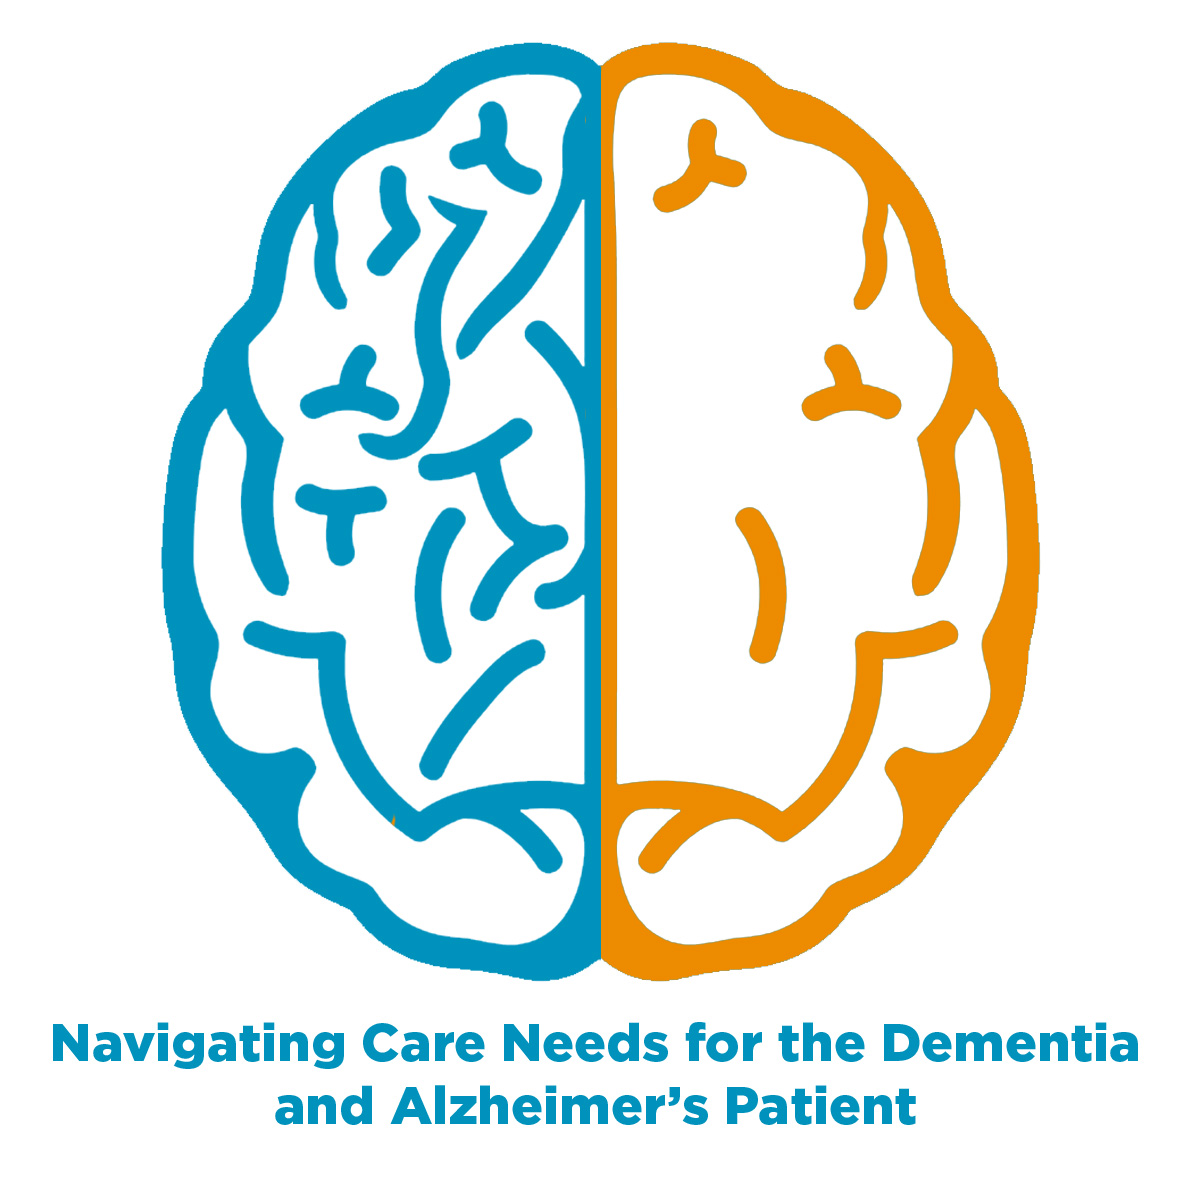 Navigating Care Needs for the Dementia and Alzheimer's Patient